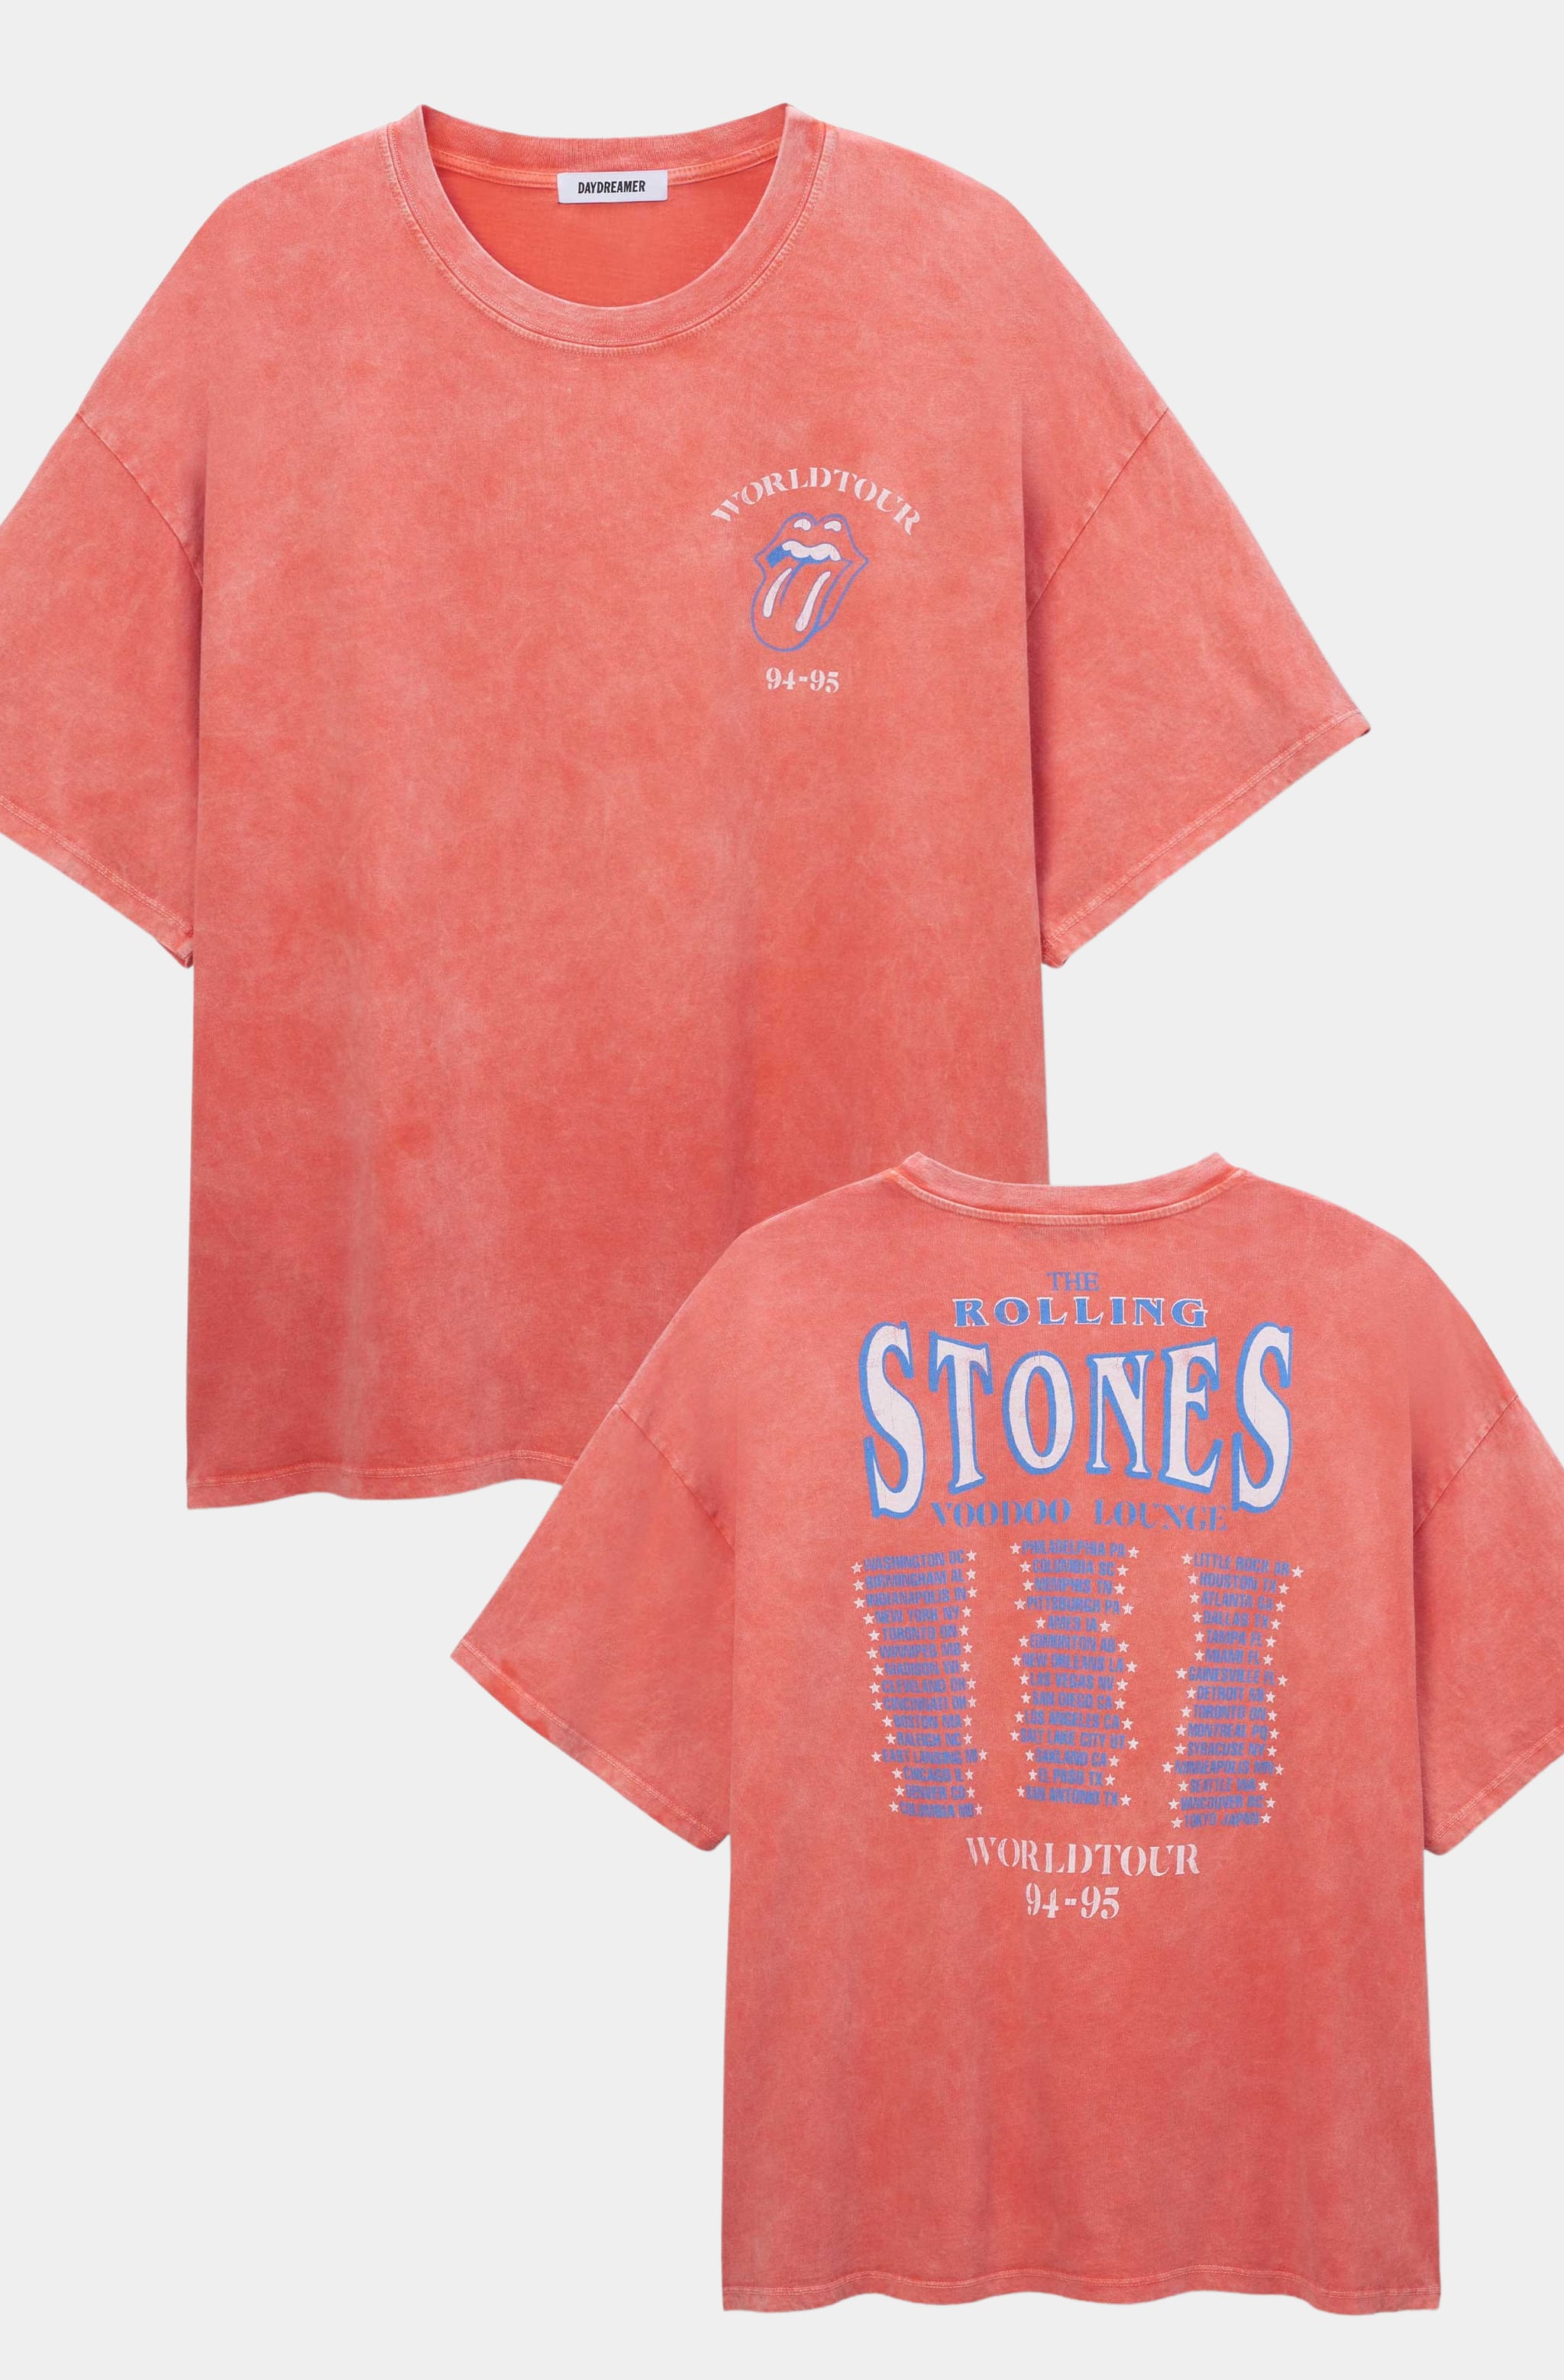 Rolling Stones World Tour 94-95 One Size Tee